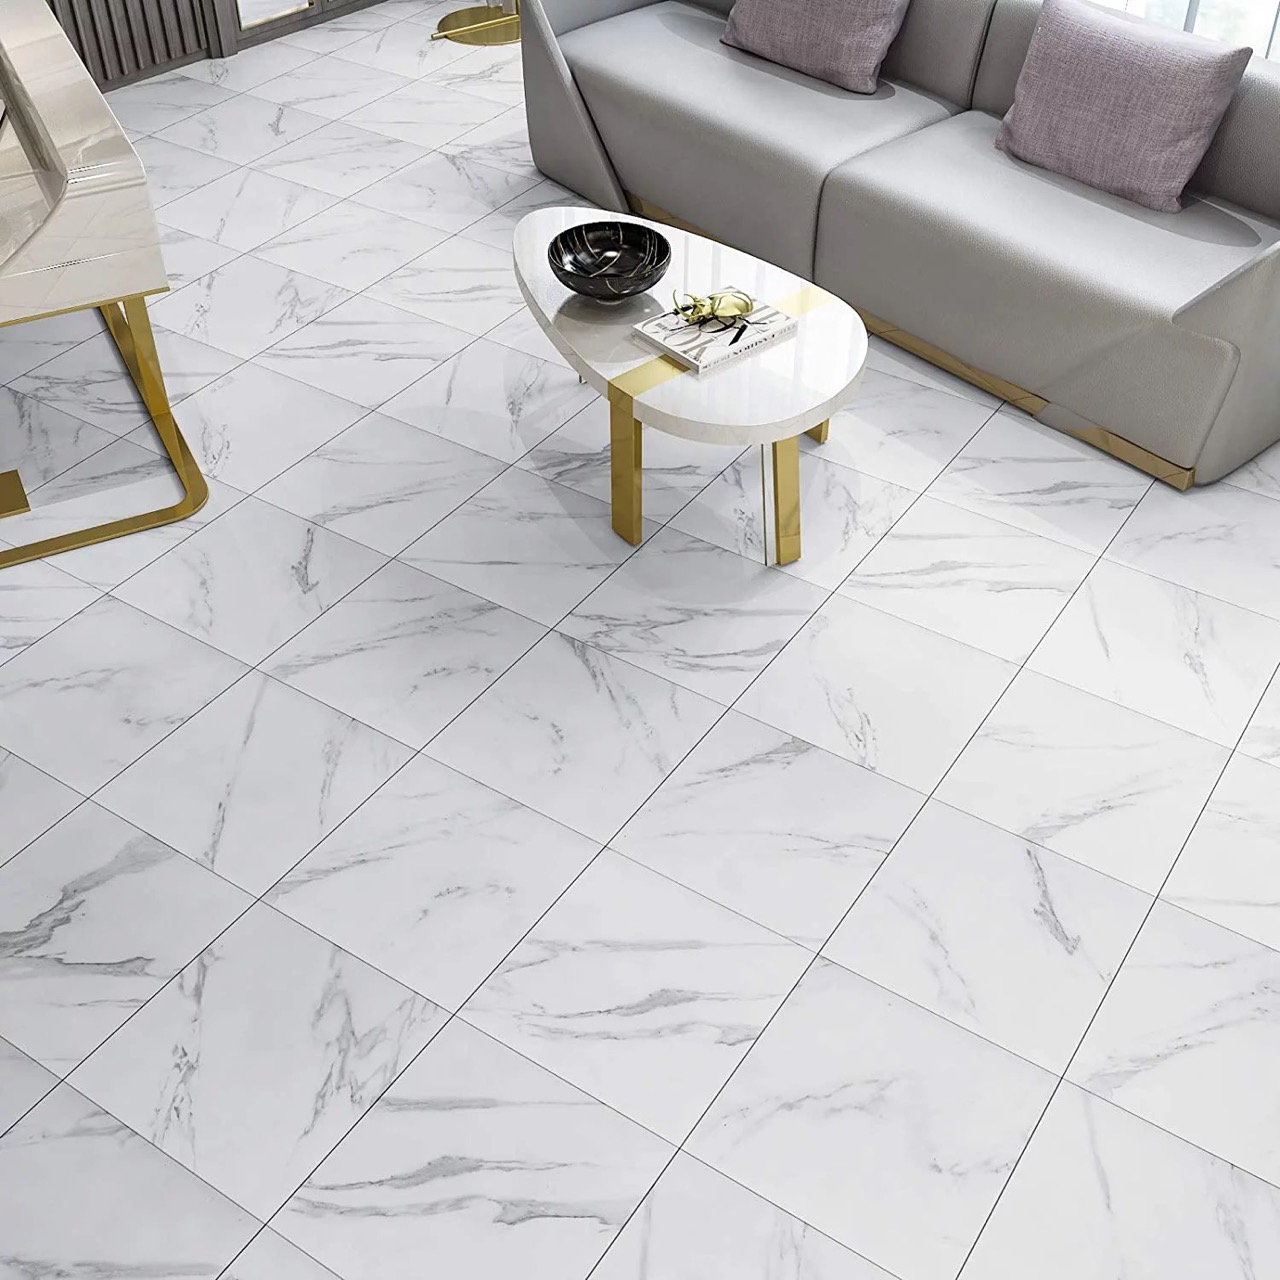 Where Can I Buy Peel And Stick Floor Tiles